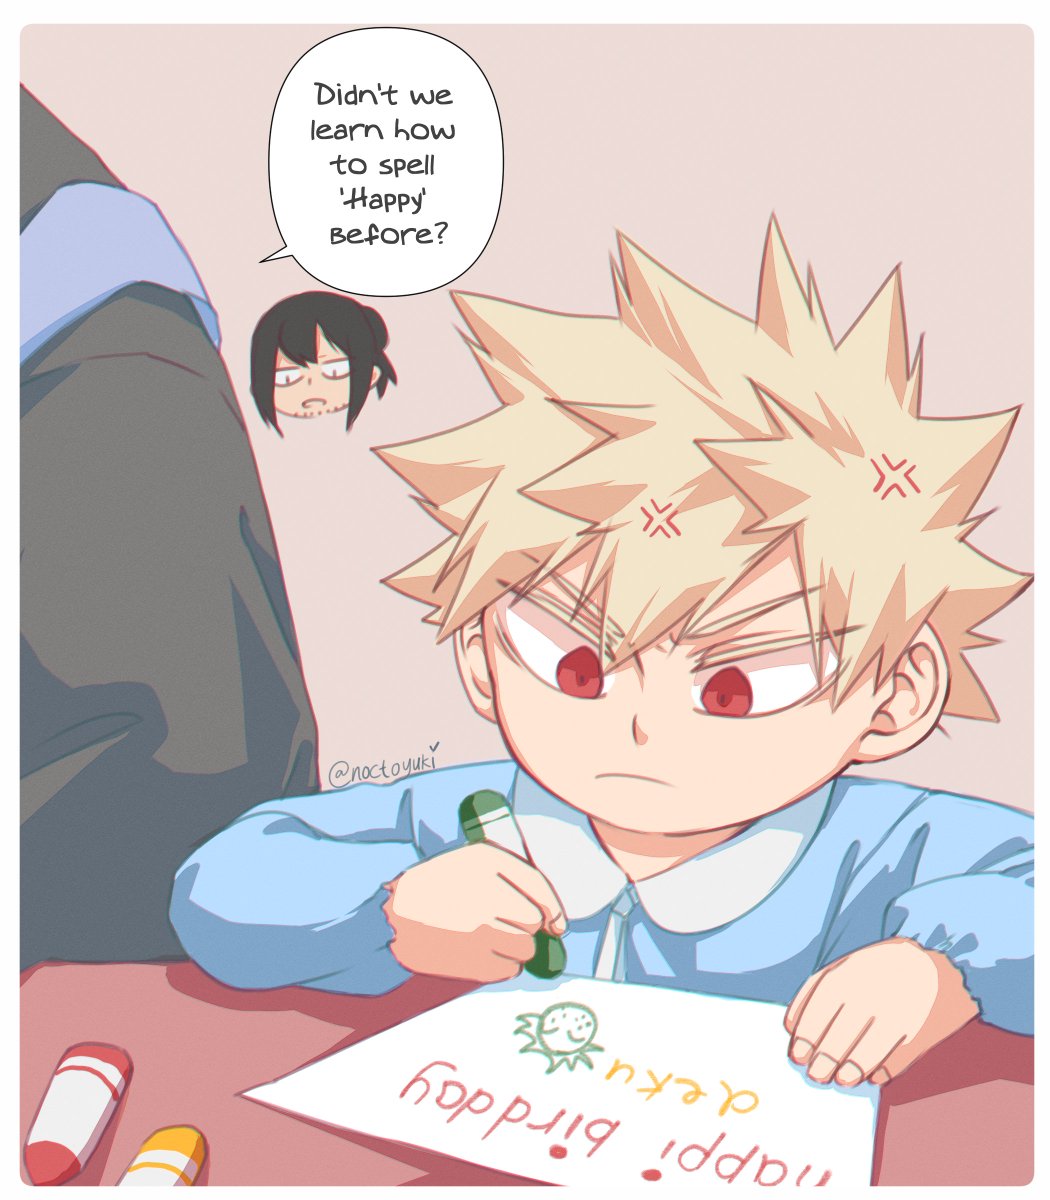 IT'S TOMORROW!! (at least for me) 😳IZUKU'S DAY!
This is the last countdown art, featuring the smol bkdk and Aizawa.

Aizawa: *looks at Kacchan's writing* "Do you need help?"
Kacchan: "I got this!" 